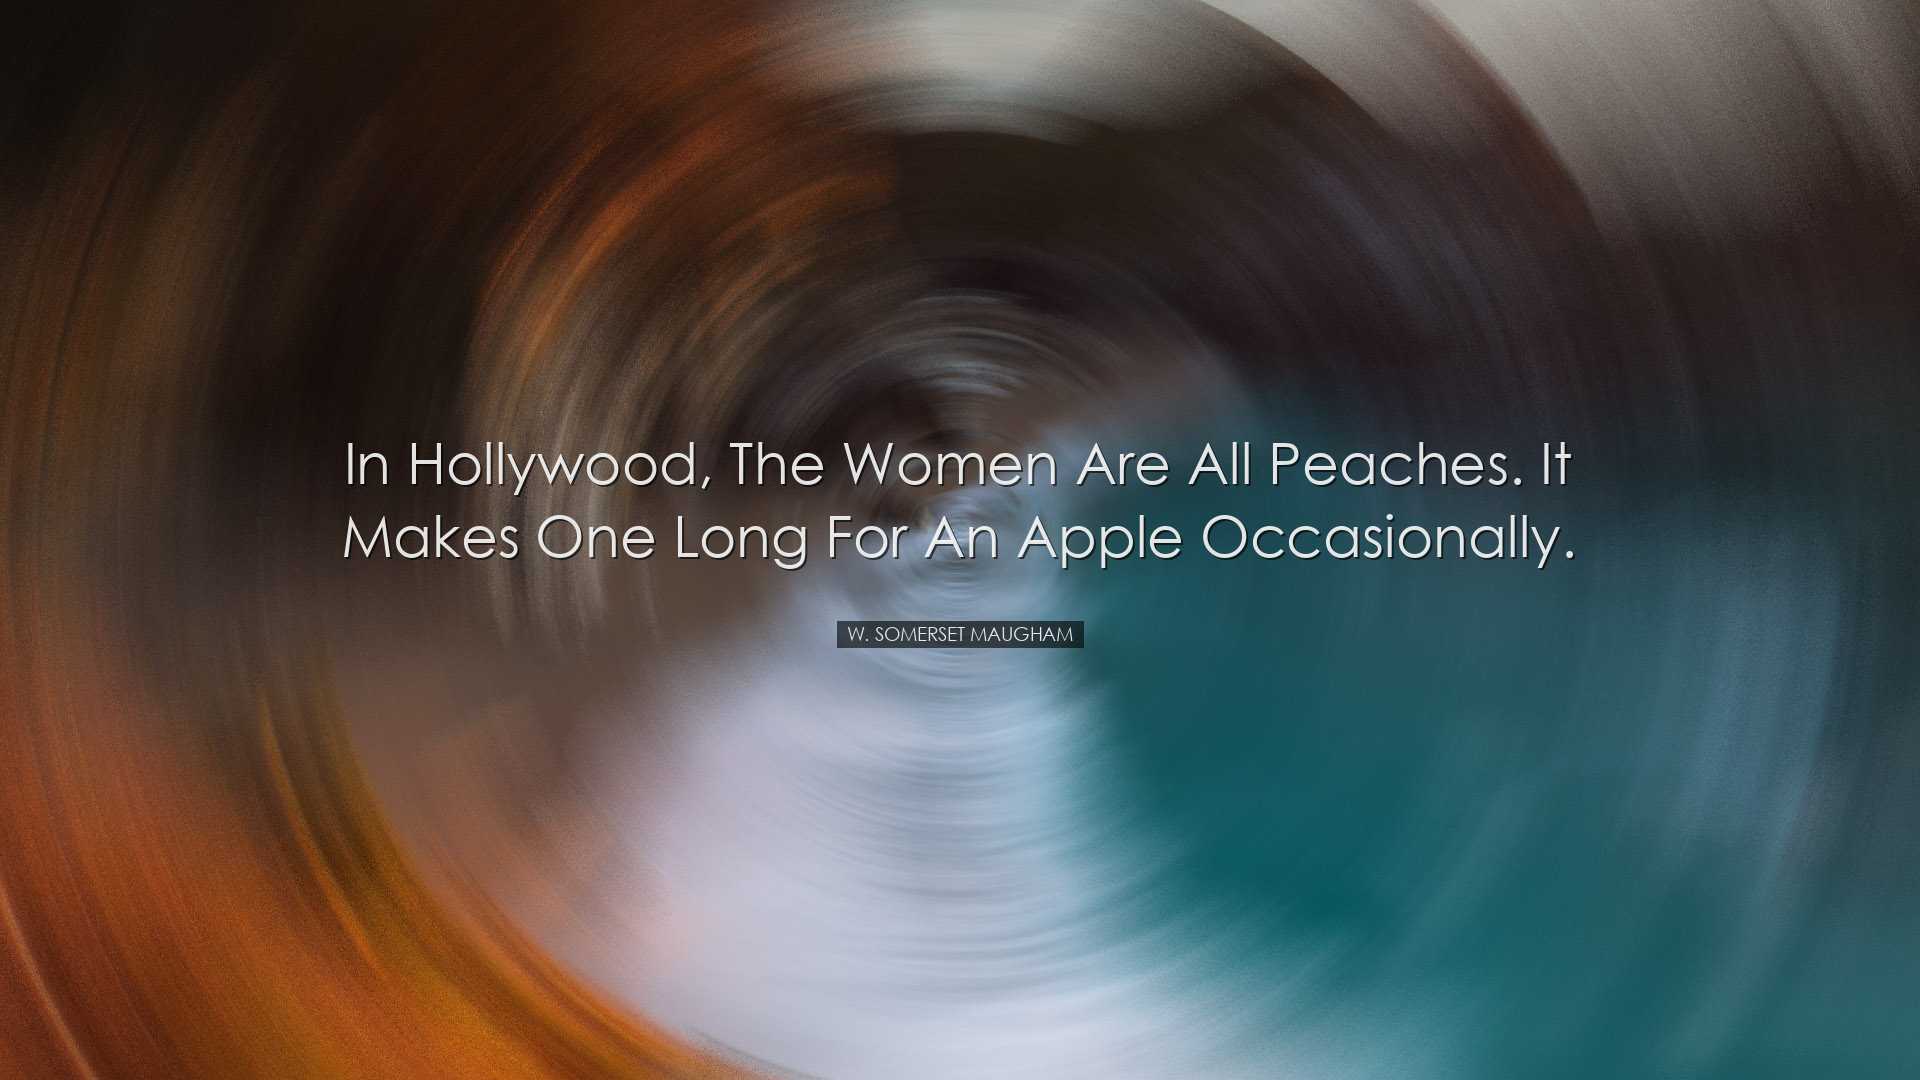 In Hollywood, the women are all peaches. It makes one long for an